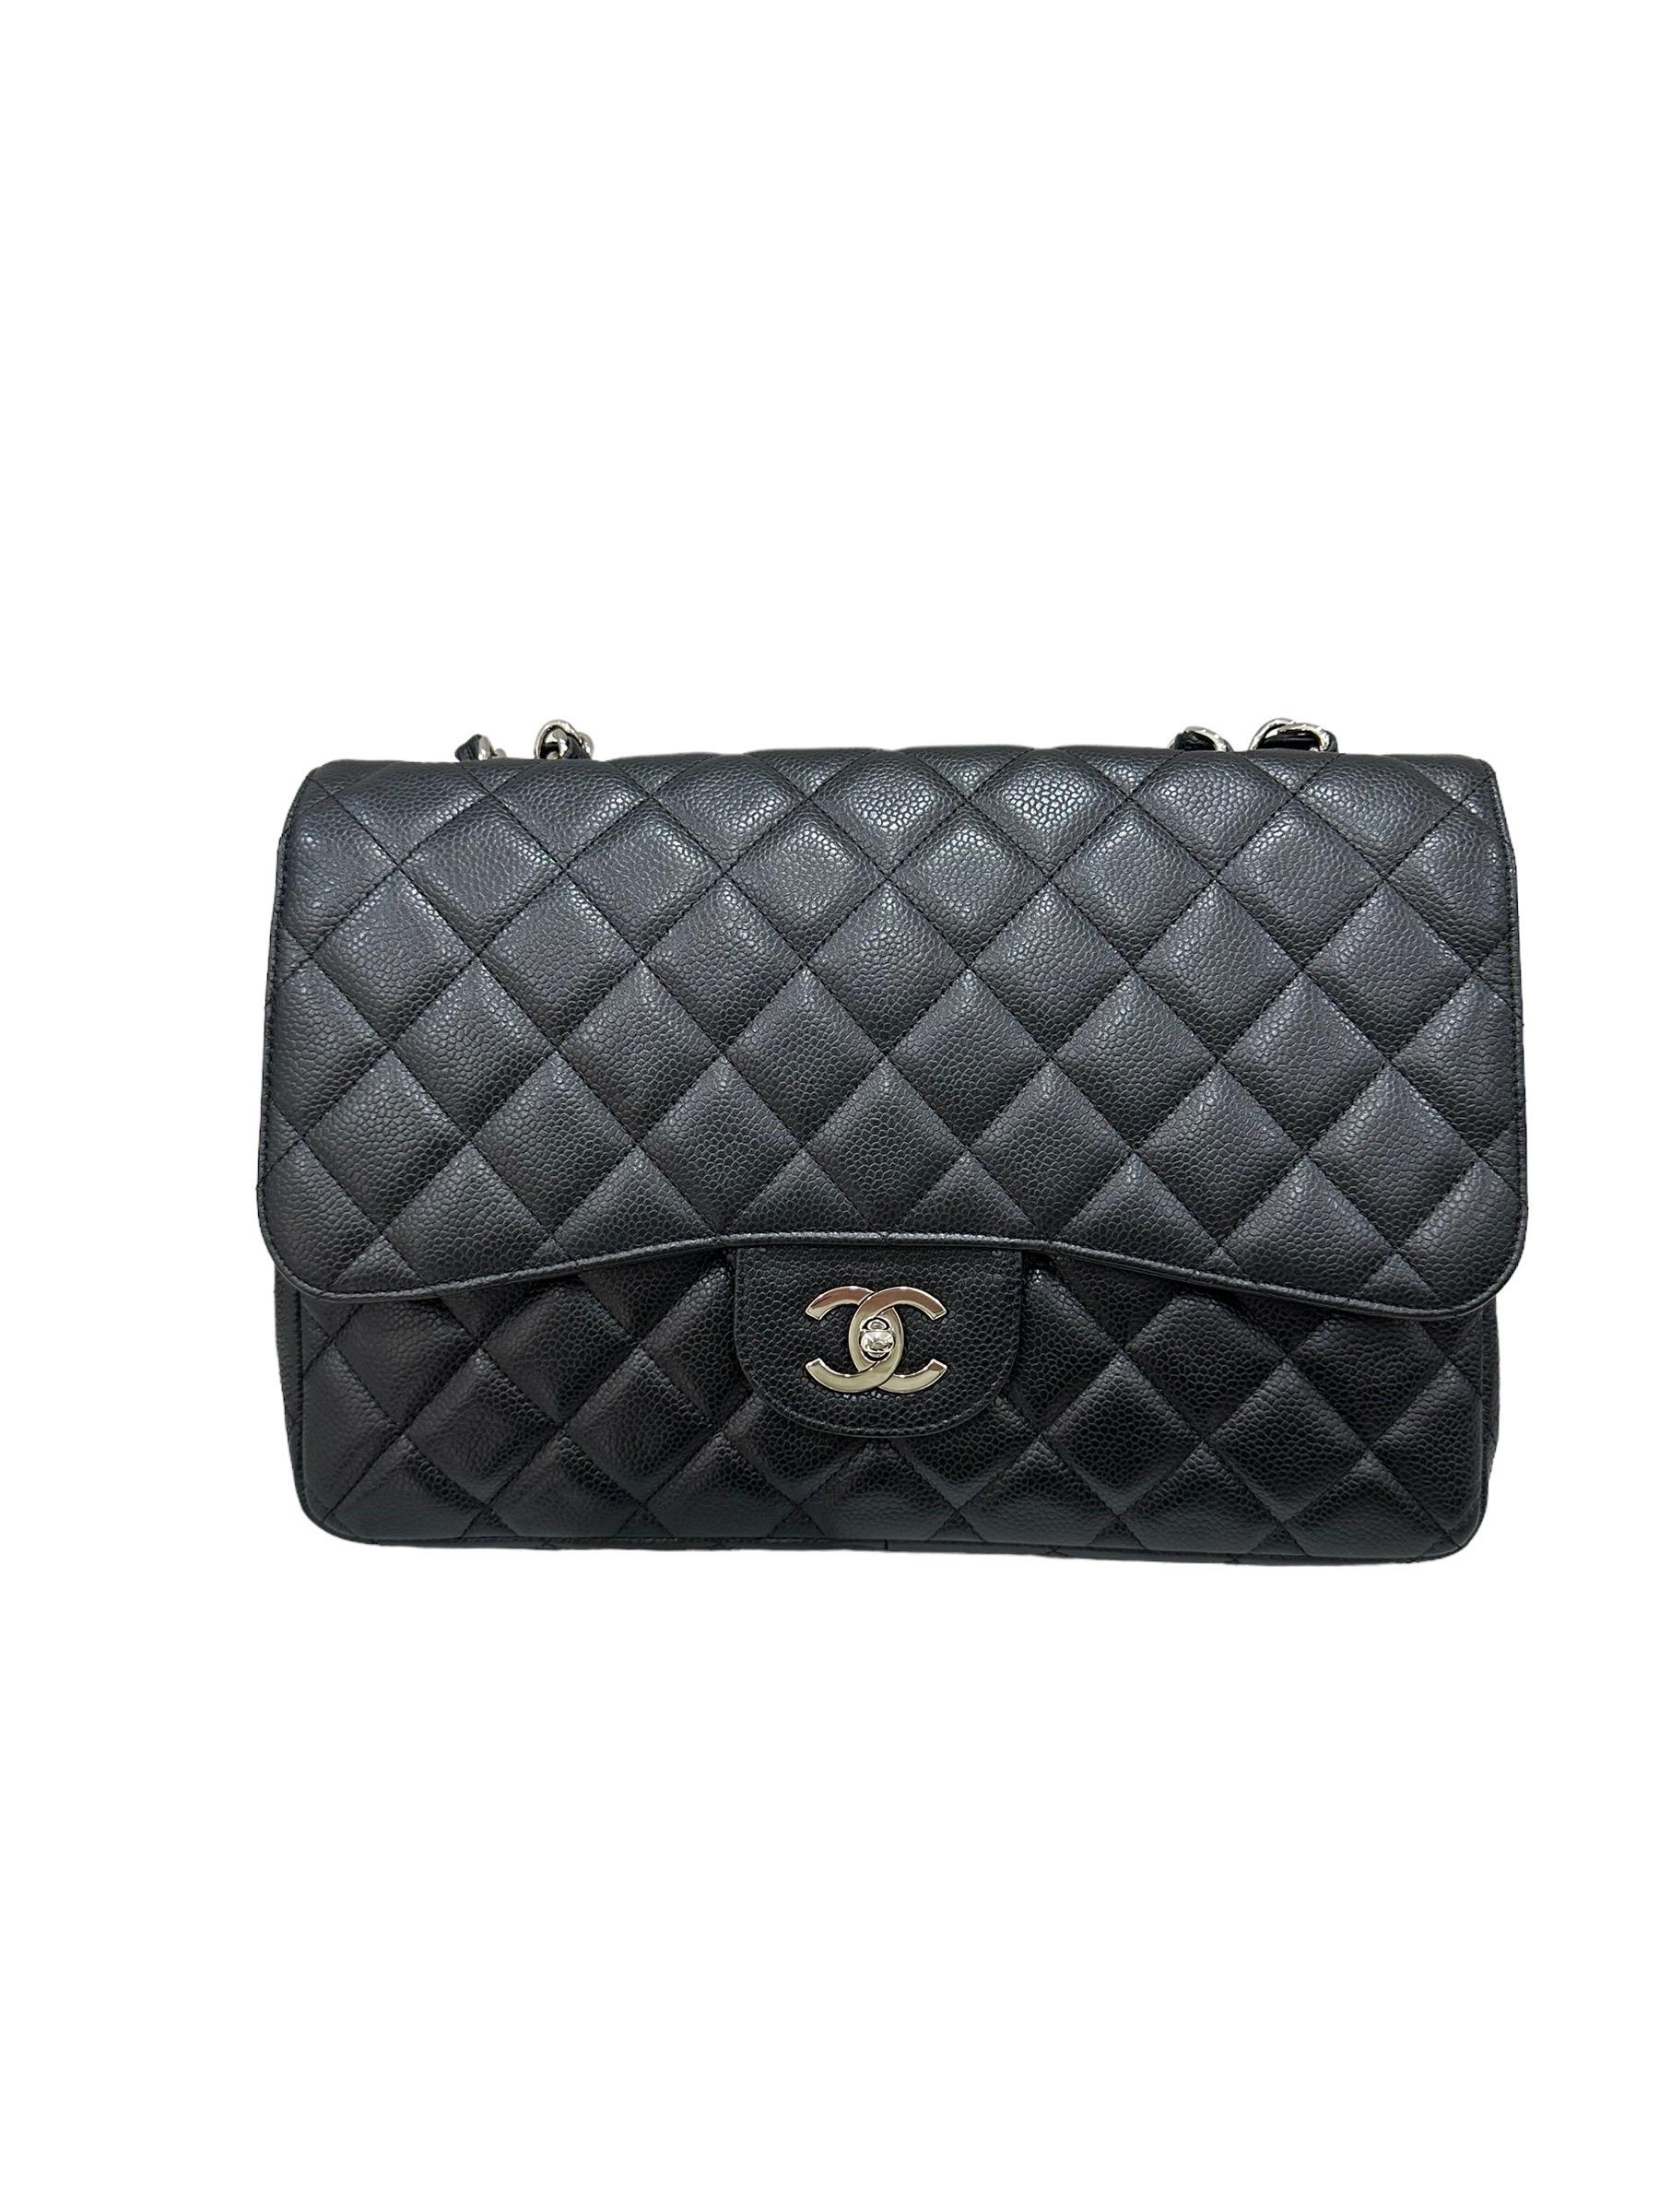 Chanel signed bag, Jumbo model, made of black cavier leather with silver hardware. Equipped with a flap with twist lock closure with CC logo, internally lined in smooth black leather, quite roomy. Equipped with a braided leather and chain shoulder